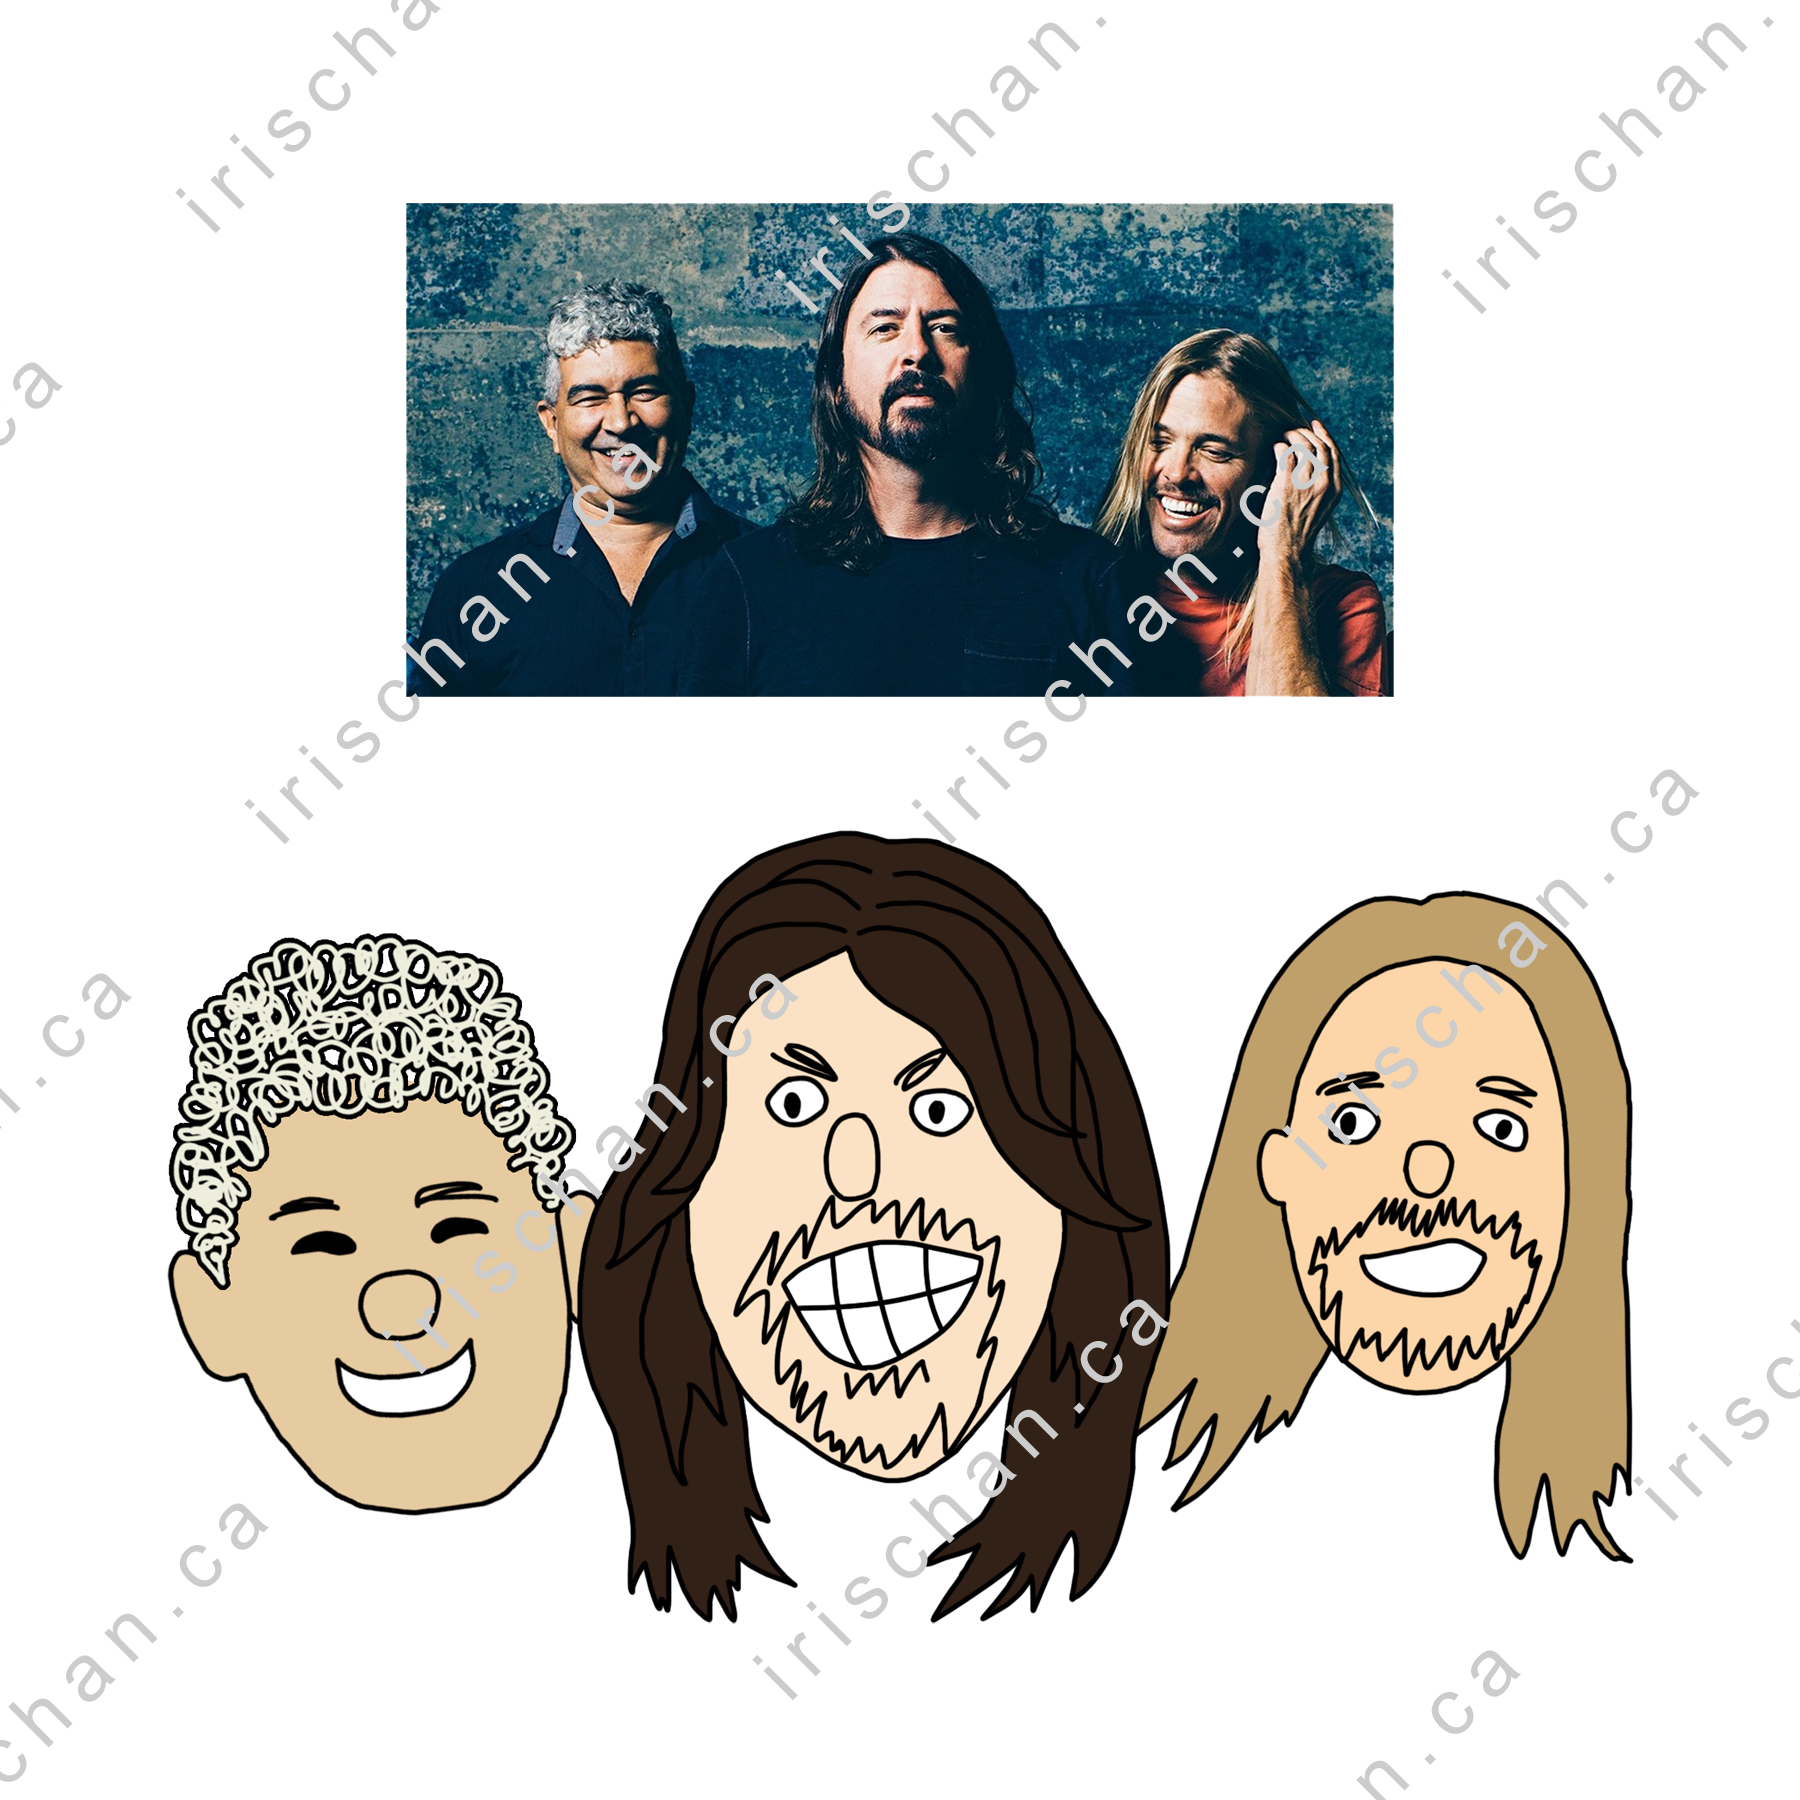 Drawing of Pat Smear, Dave Grohl, and Taylor Hawkins from Foo Fighters